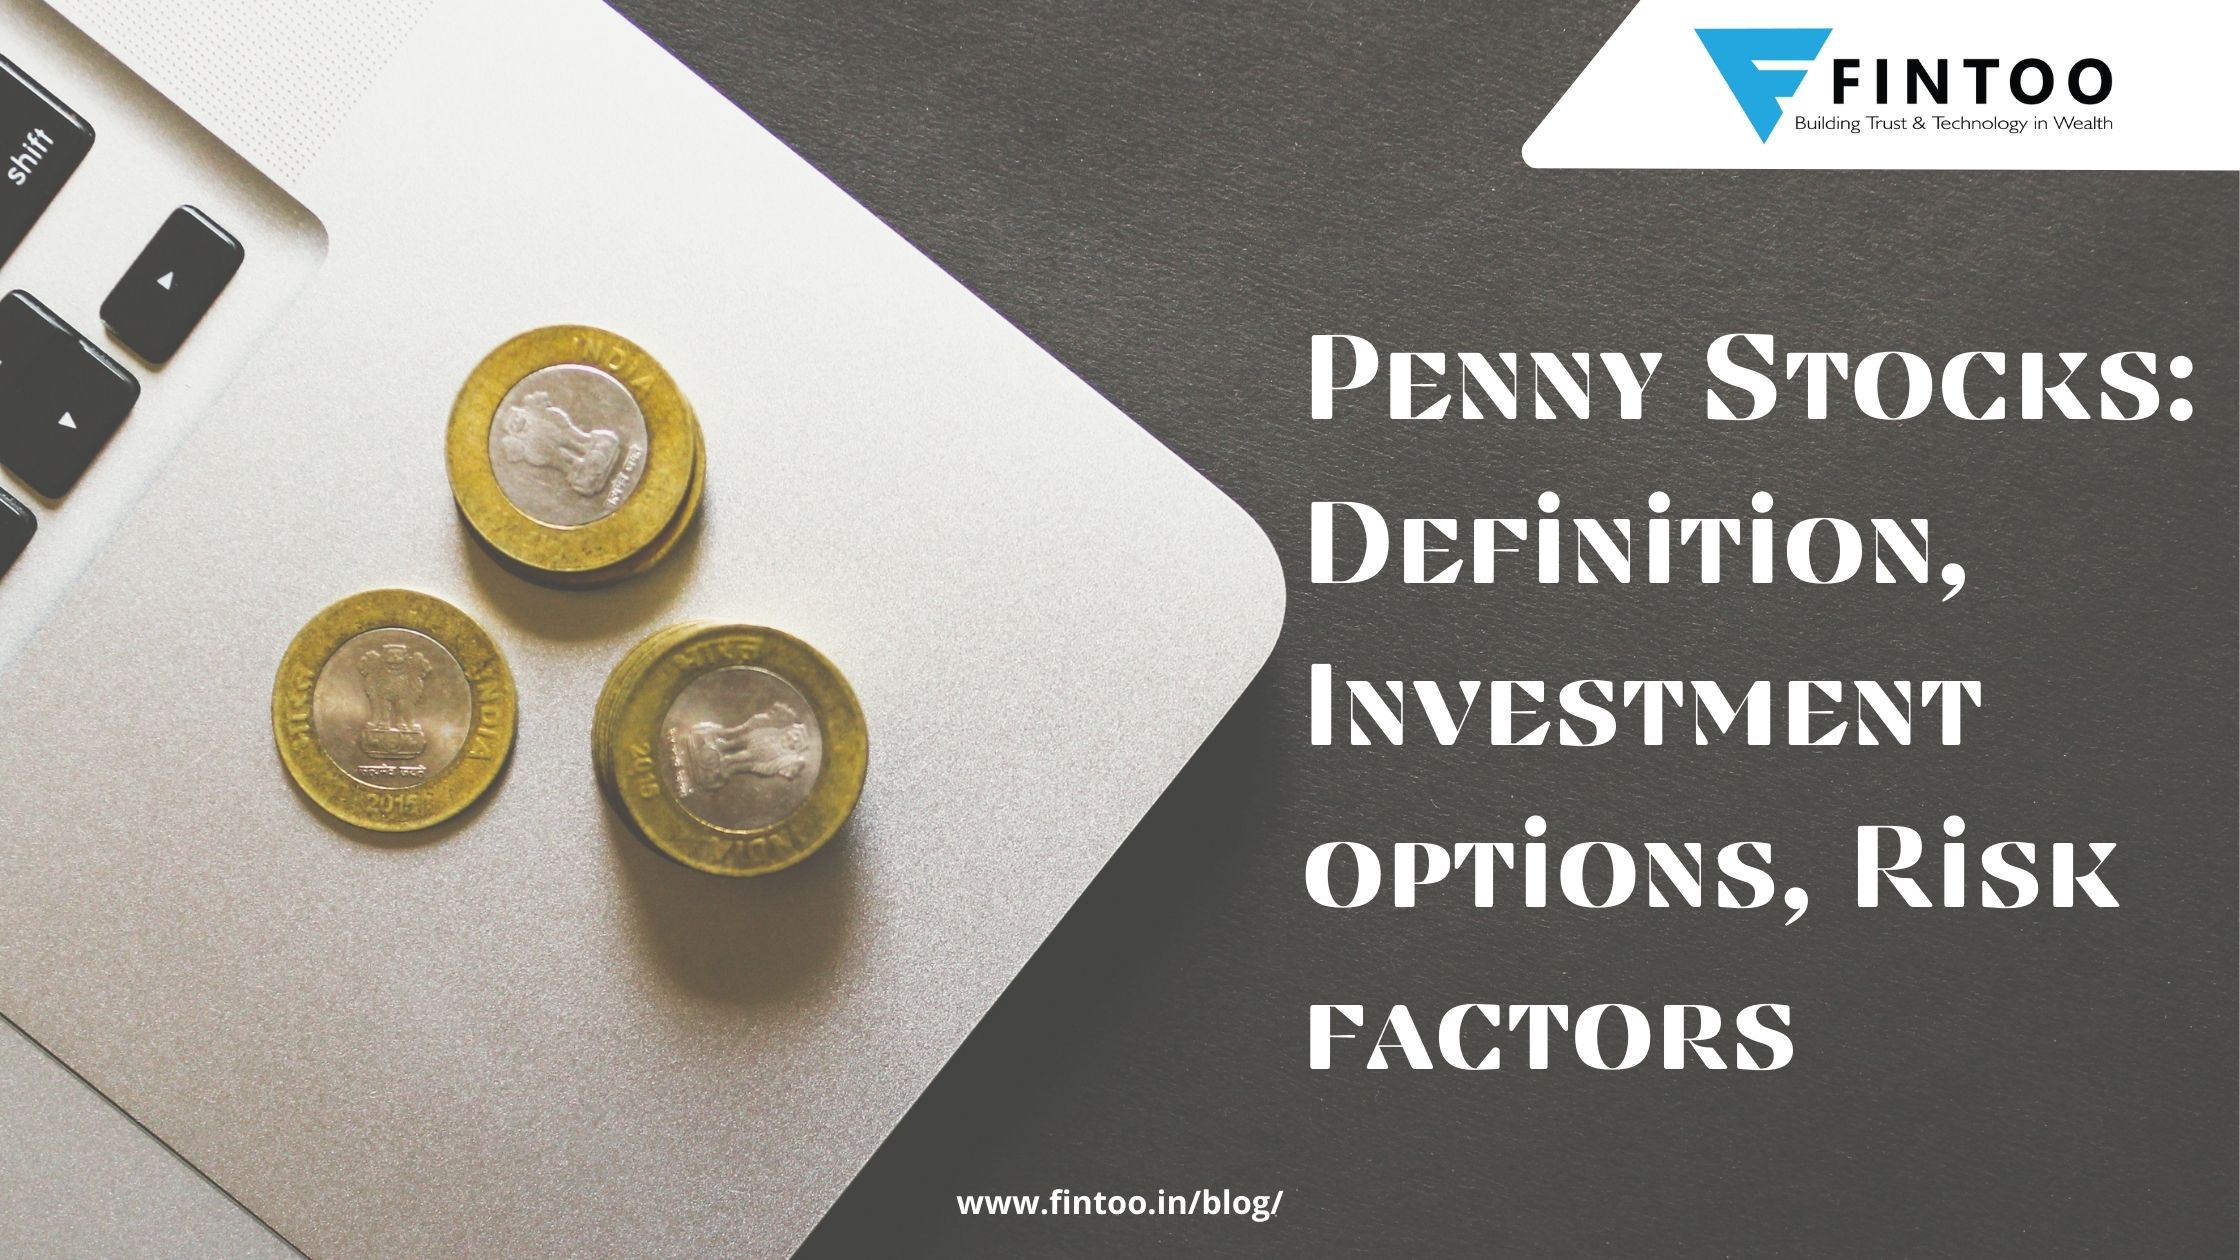 Penny Stocks Definition, Investment Options, Risk Factors Fintoo Blog